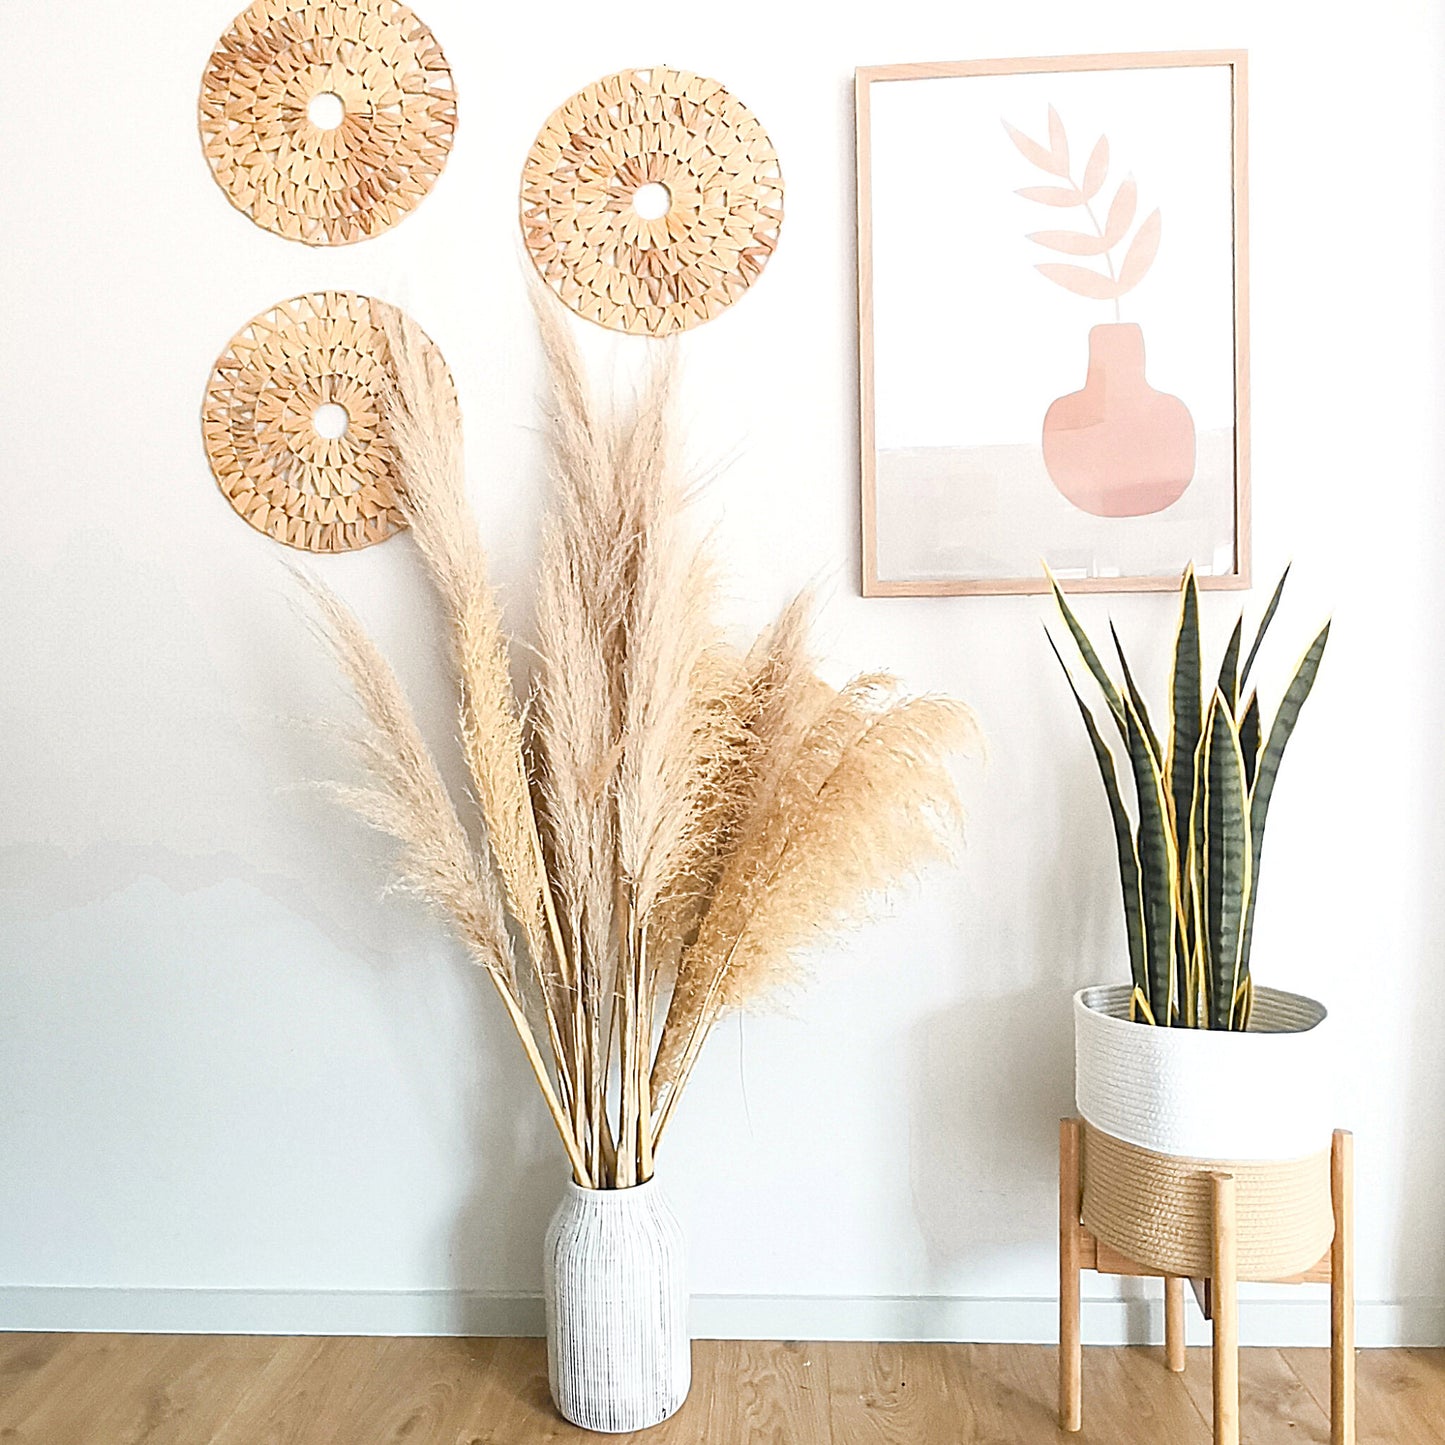 Rounded natural seagrass perfect as an eco-chic and boho wall decor.